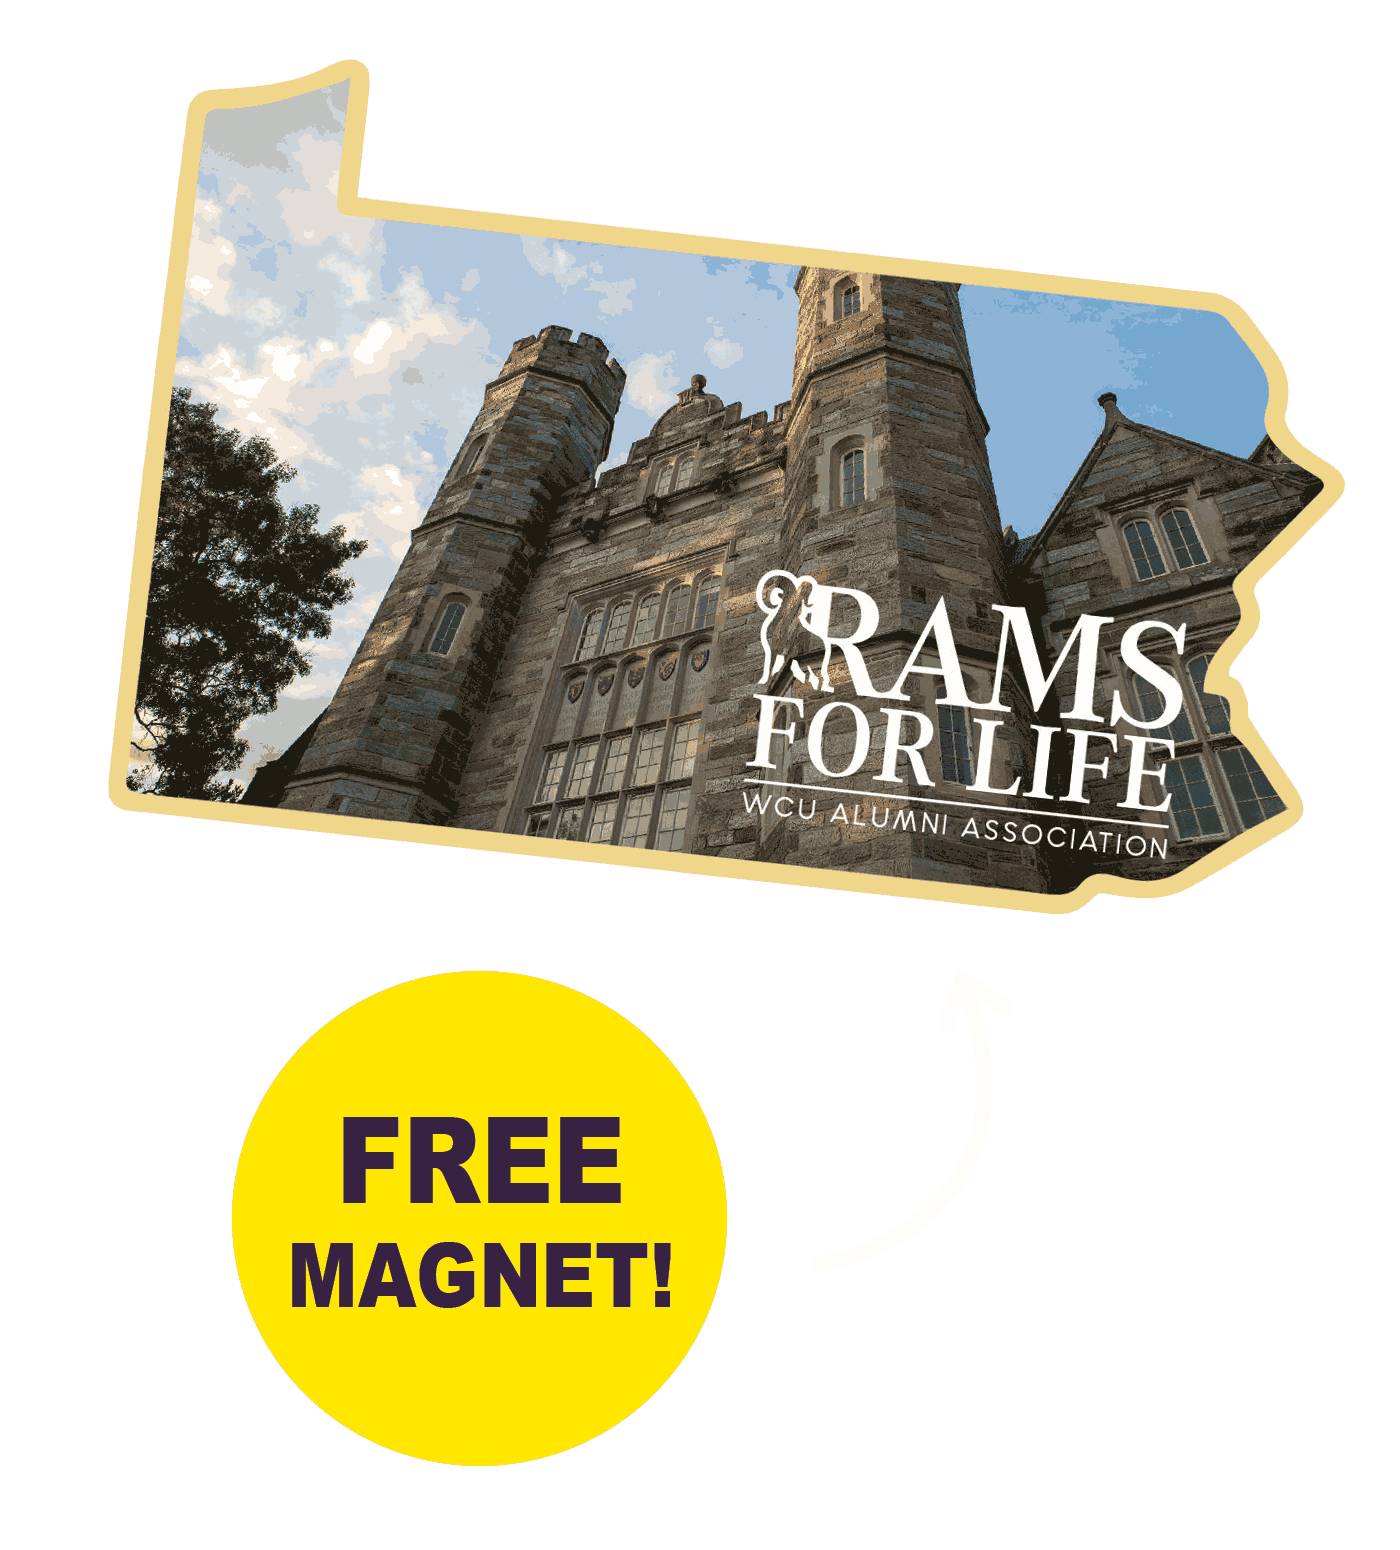 Free Magnet sign with arrow pointing to visual representation of magnet - Magenet in shape of pennsylvania with image of Asplundh Hall and Rams for life message